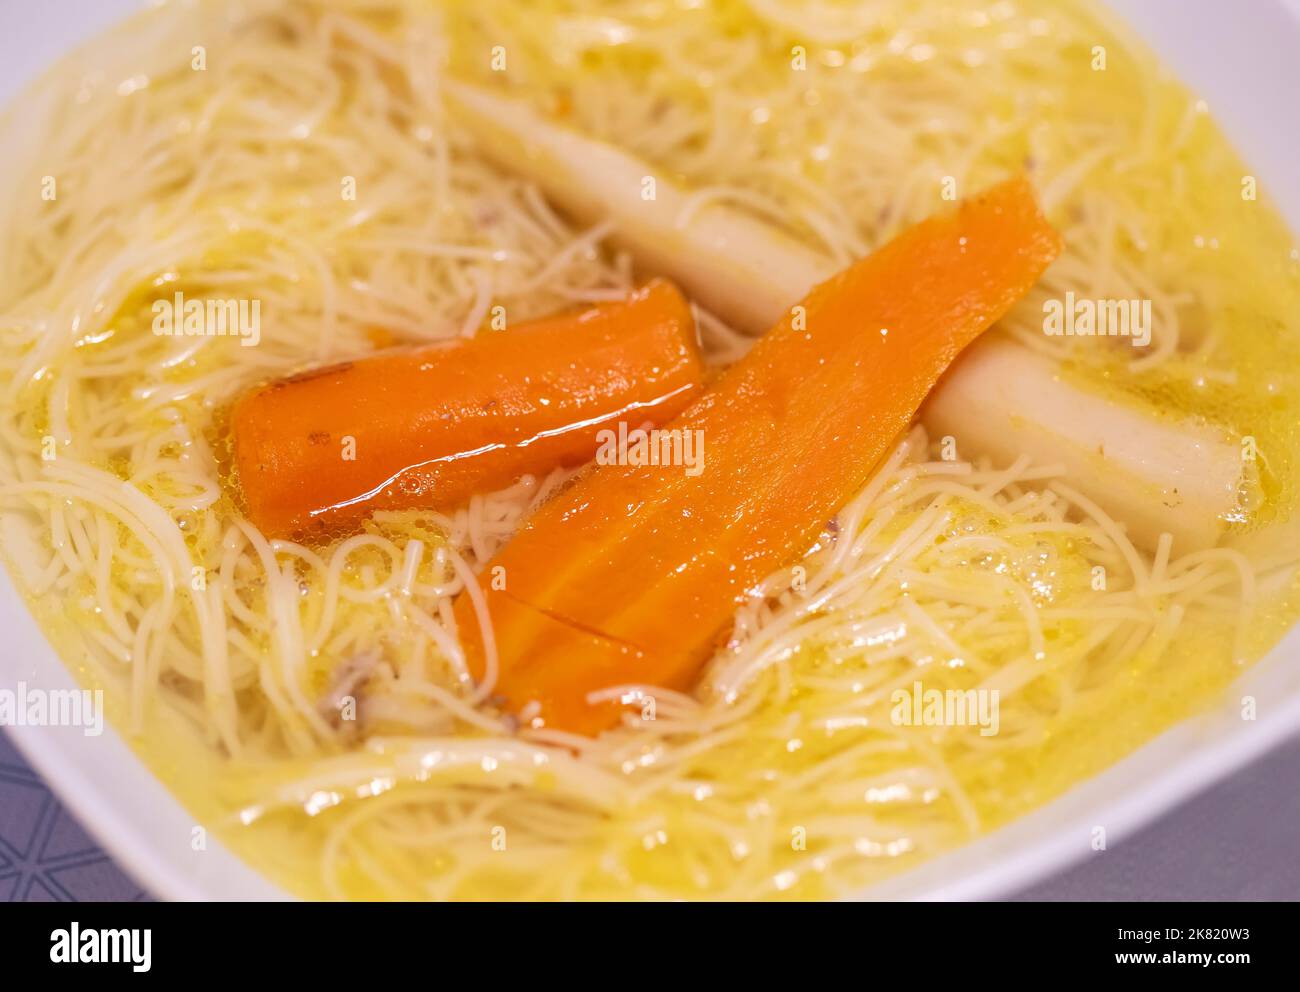 Turnip and Carrot Noodles